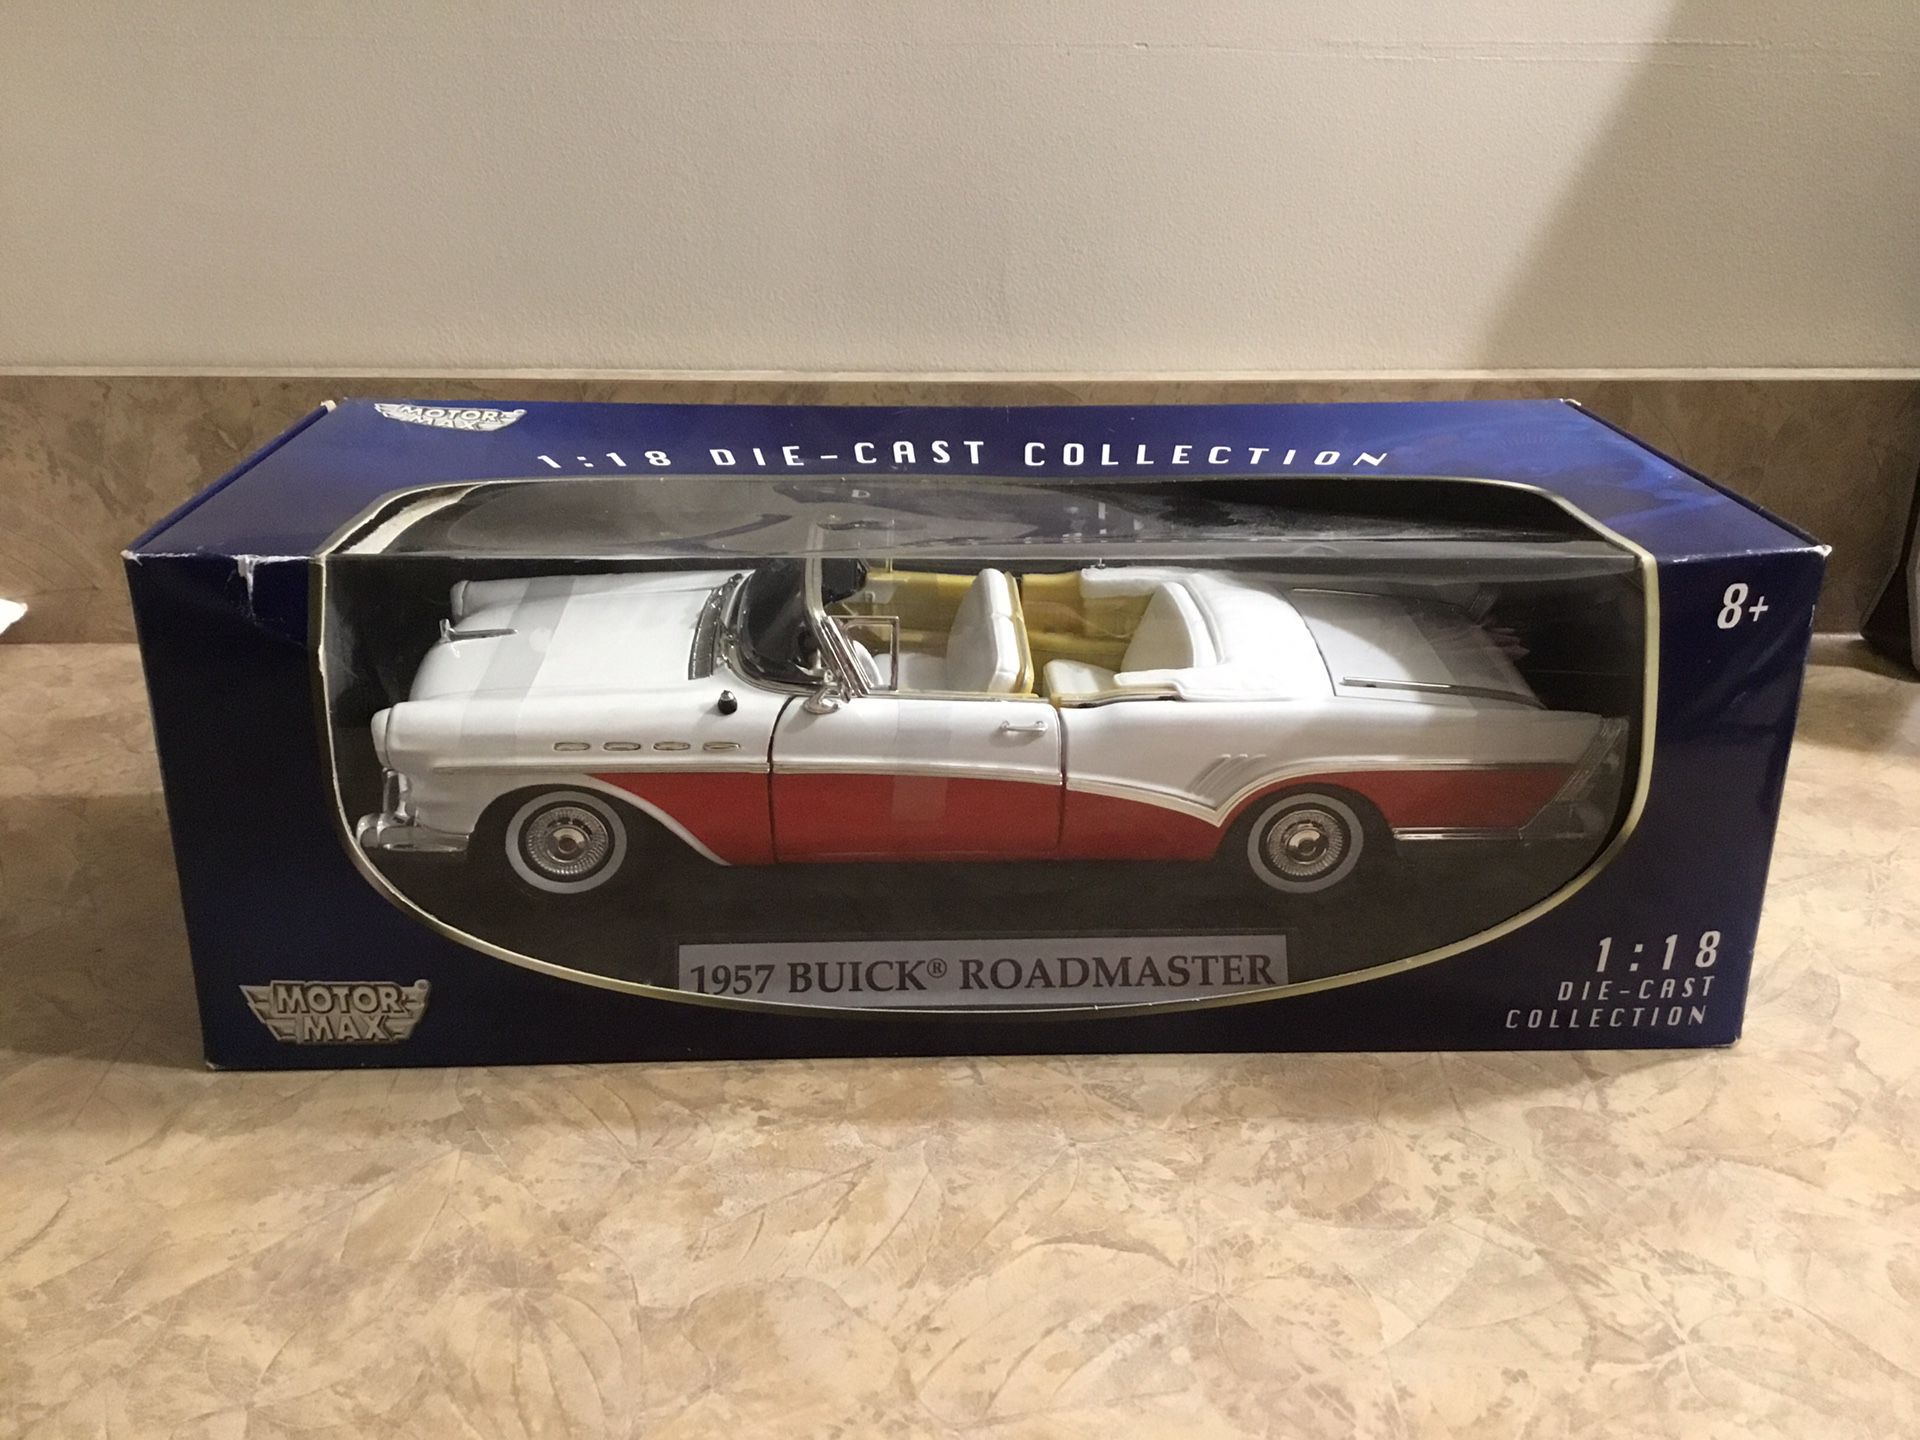 Die-cast  1957 Buick Roadmaster  Convertible   White/Red  1:18 Scale  New In Box